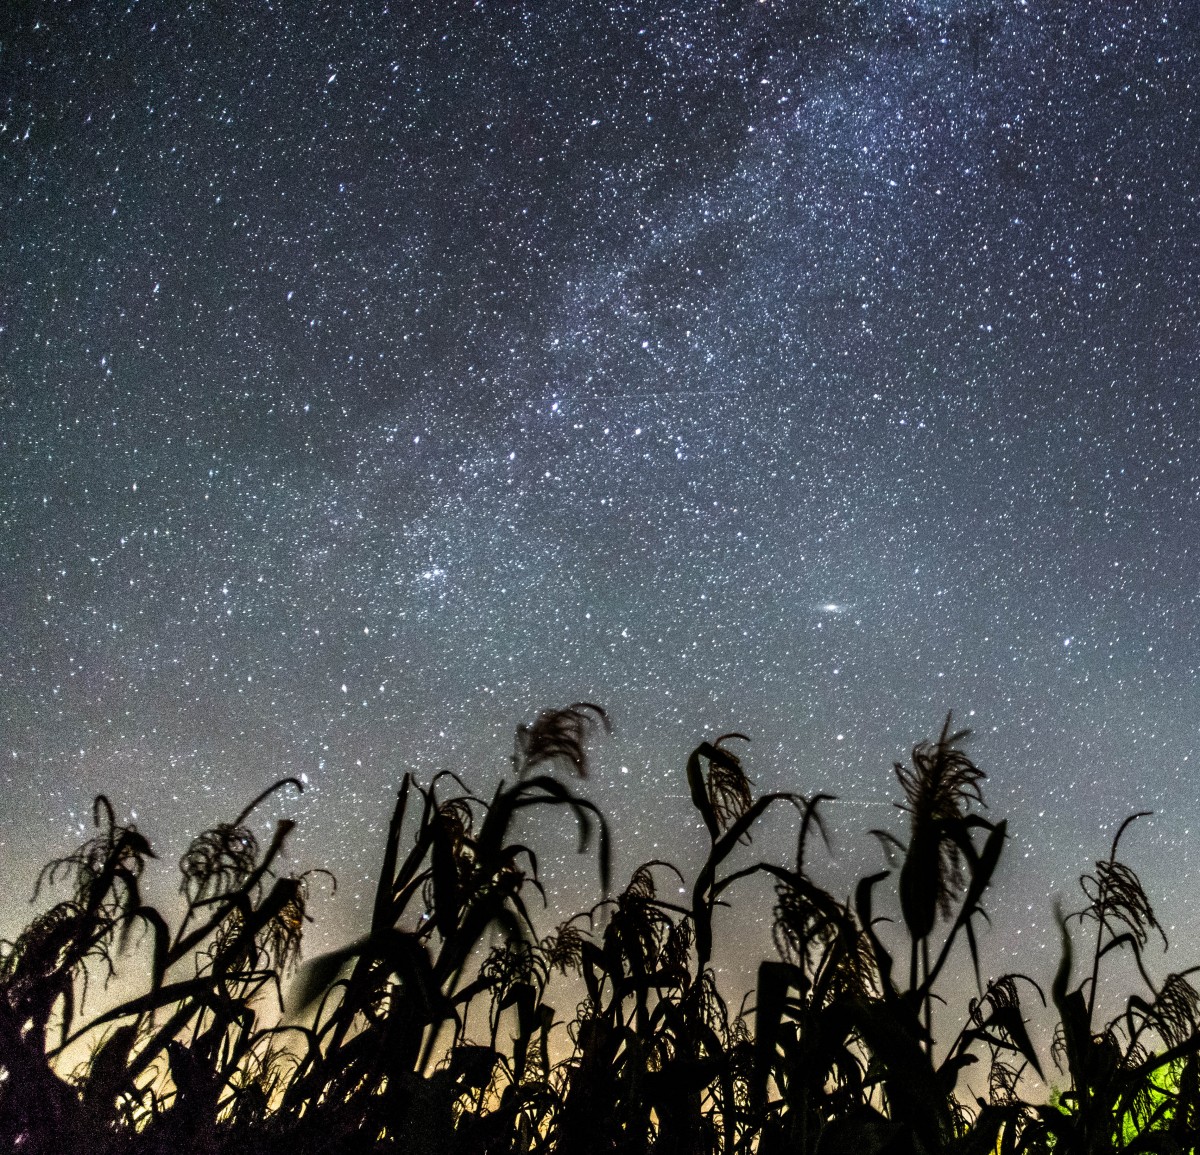 A view of the night sky from Lauwersmeer Dark Sky Park.